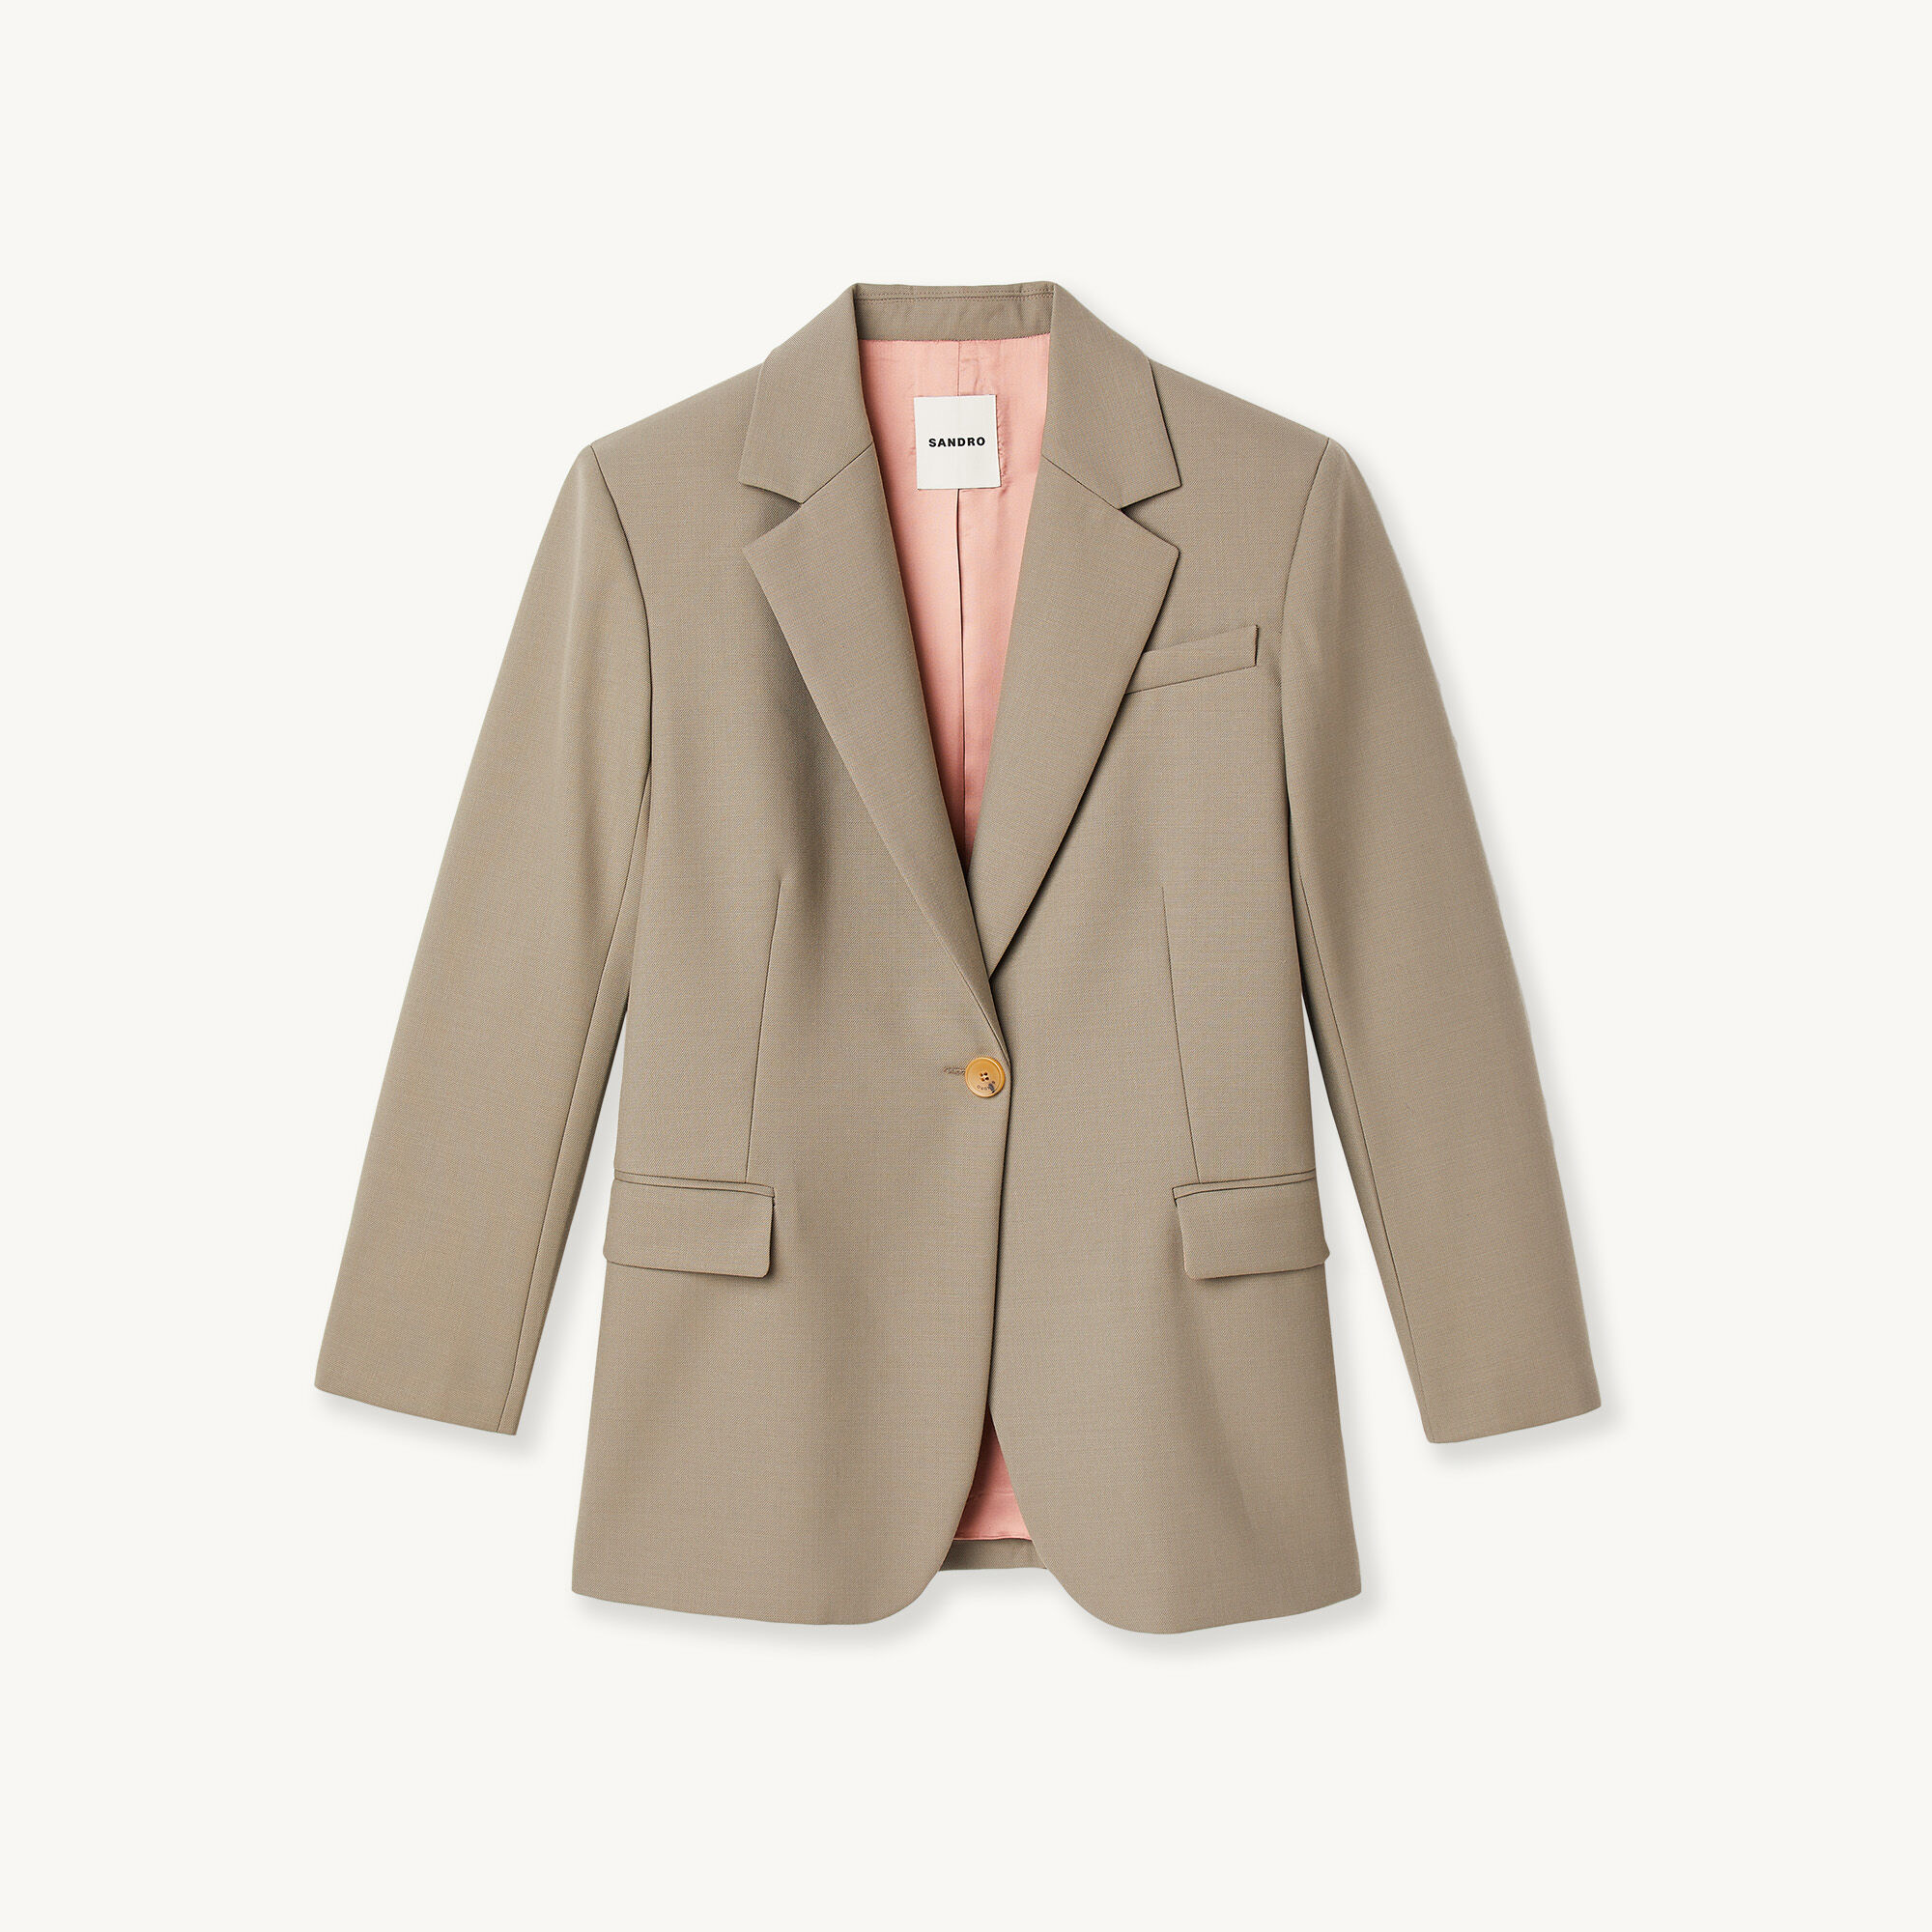 Tailored jacket with pockets Select a size and Login to add to Wish list